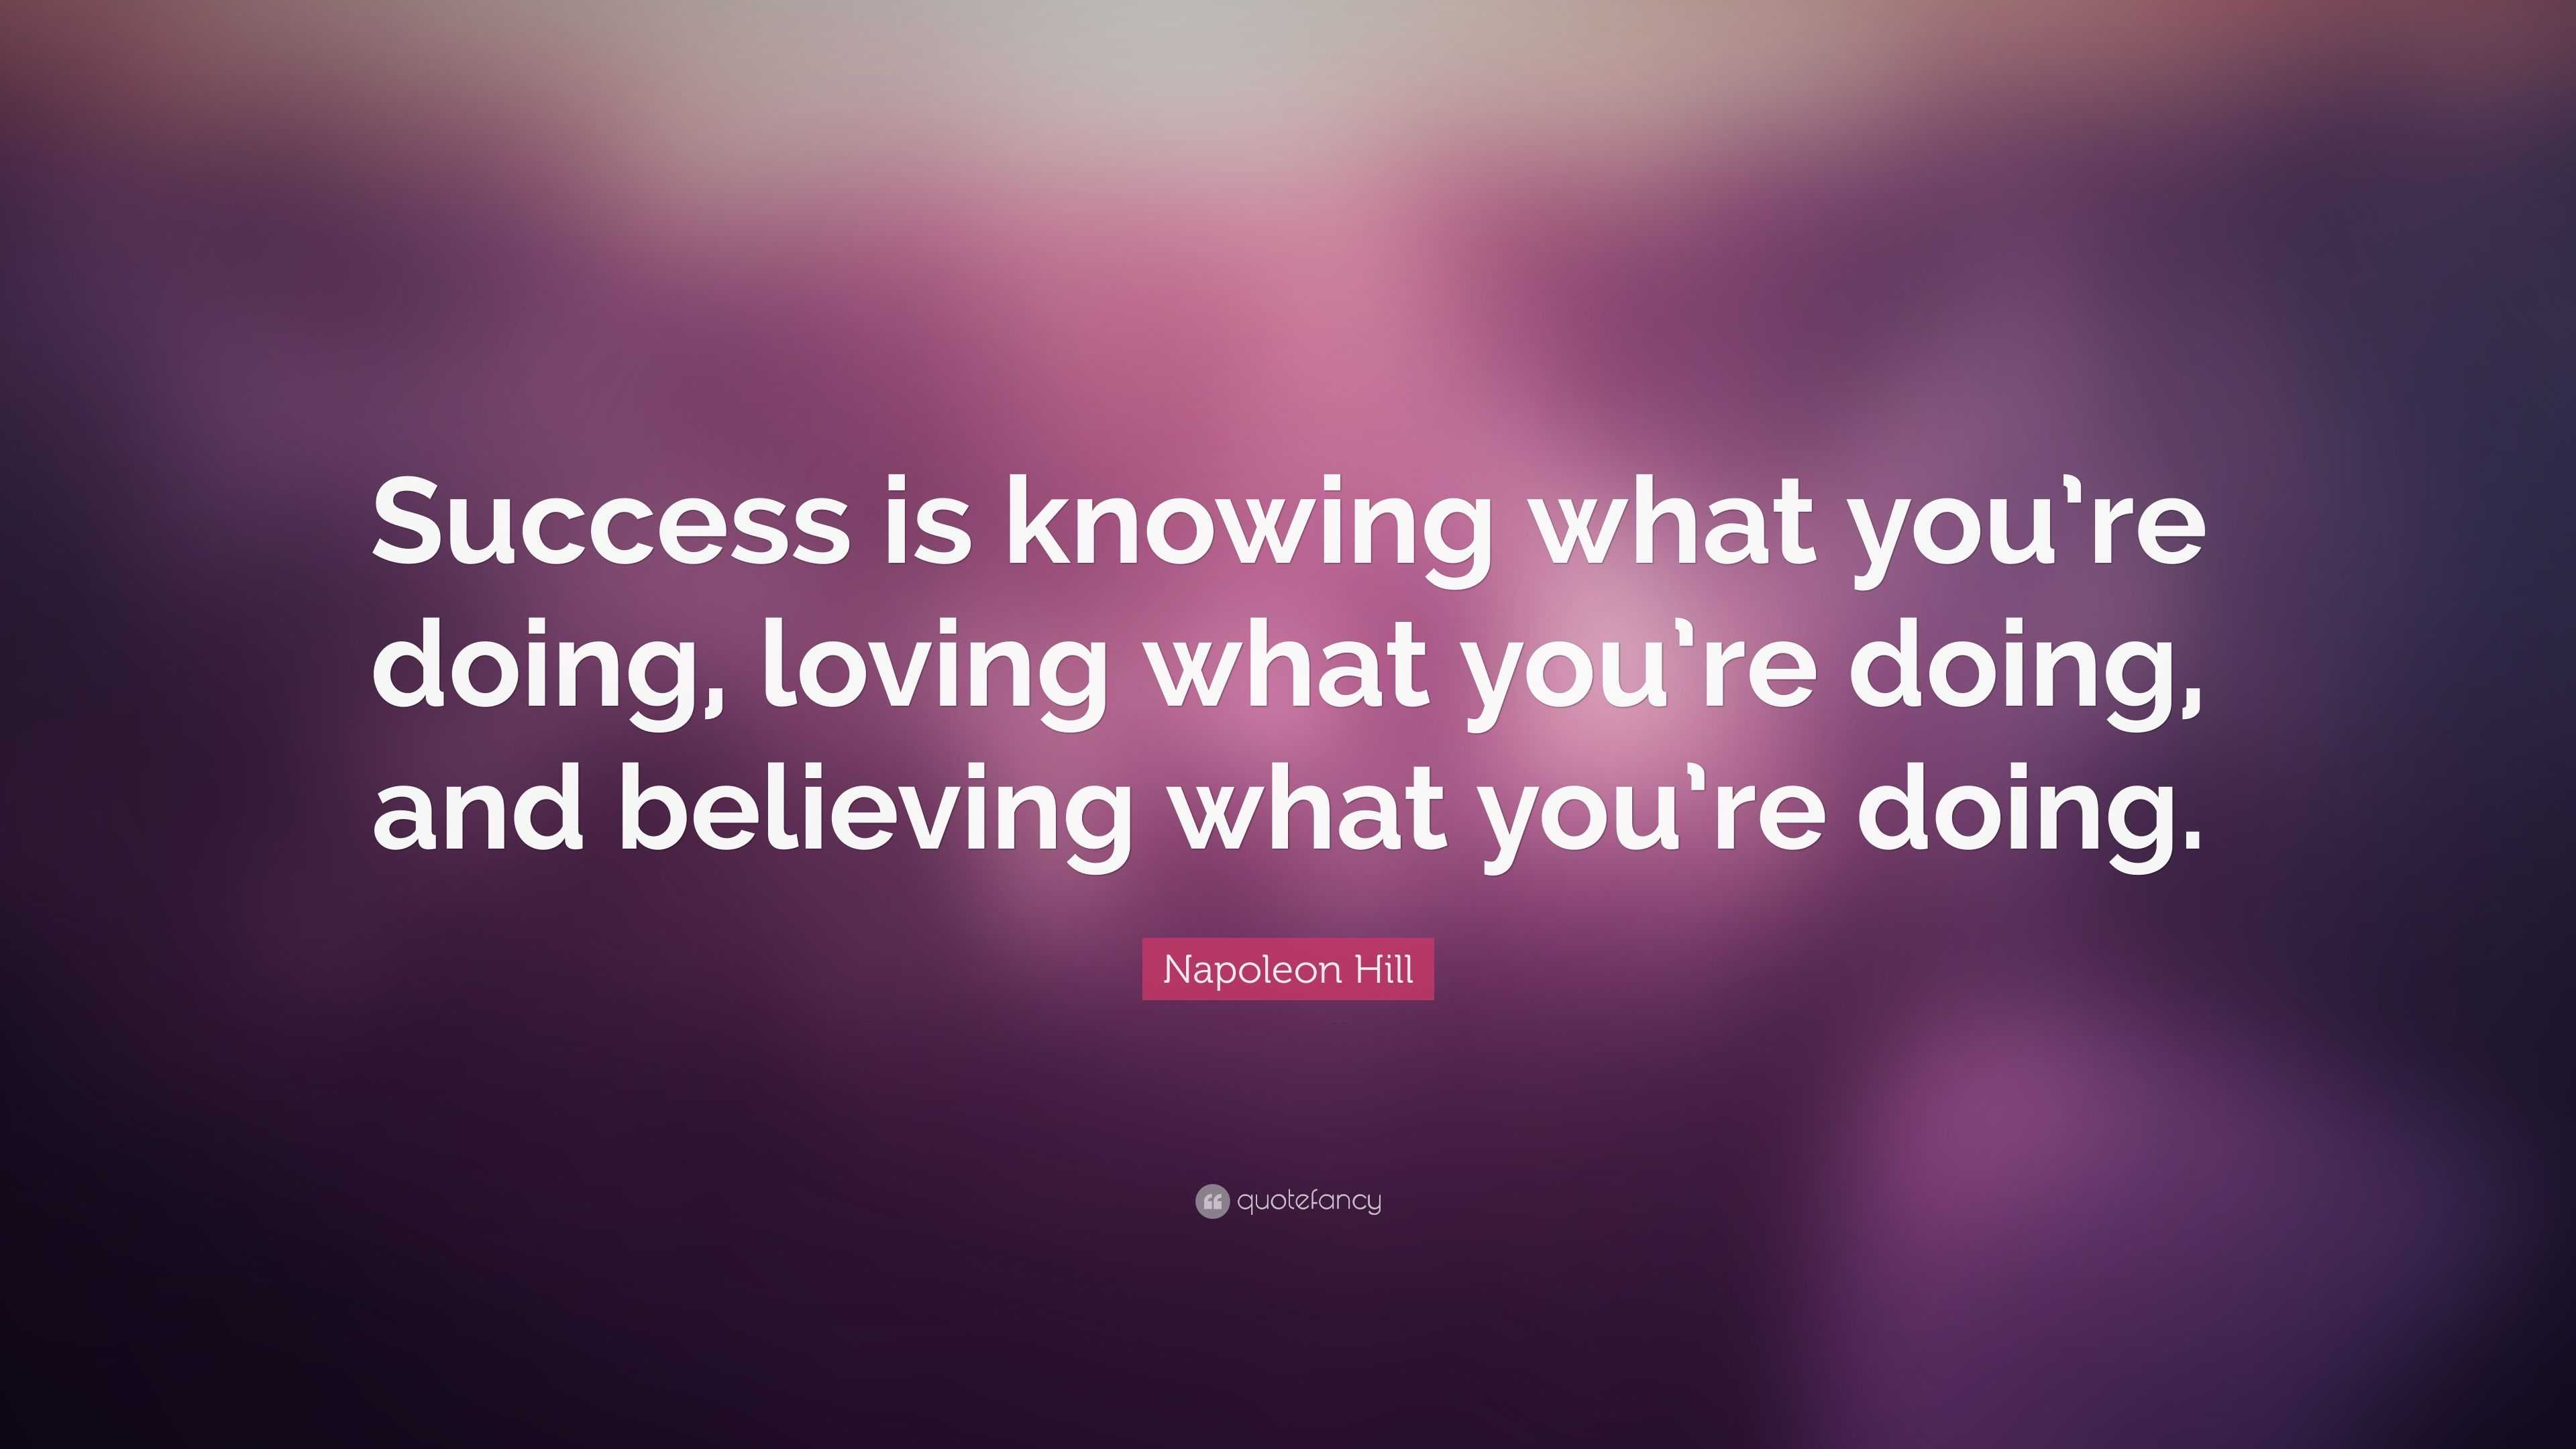 Napoleon Hill Quote: “Success is knowing what you’re doing, loving what ...